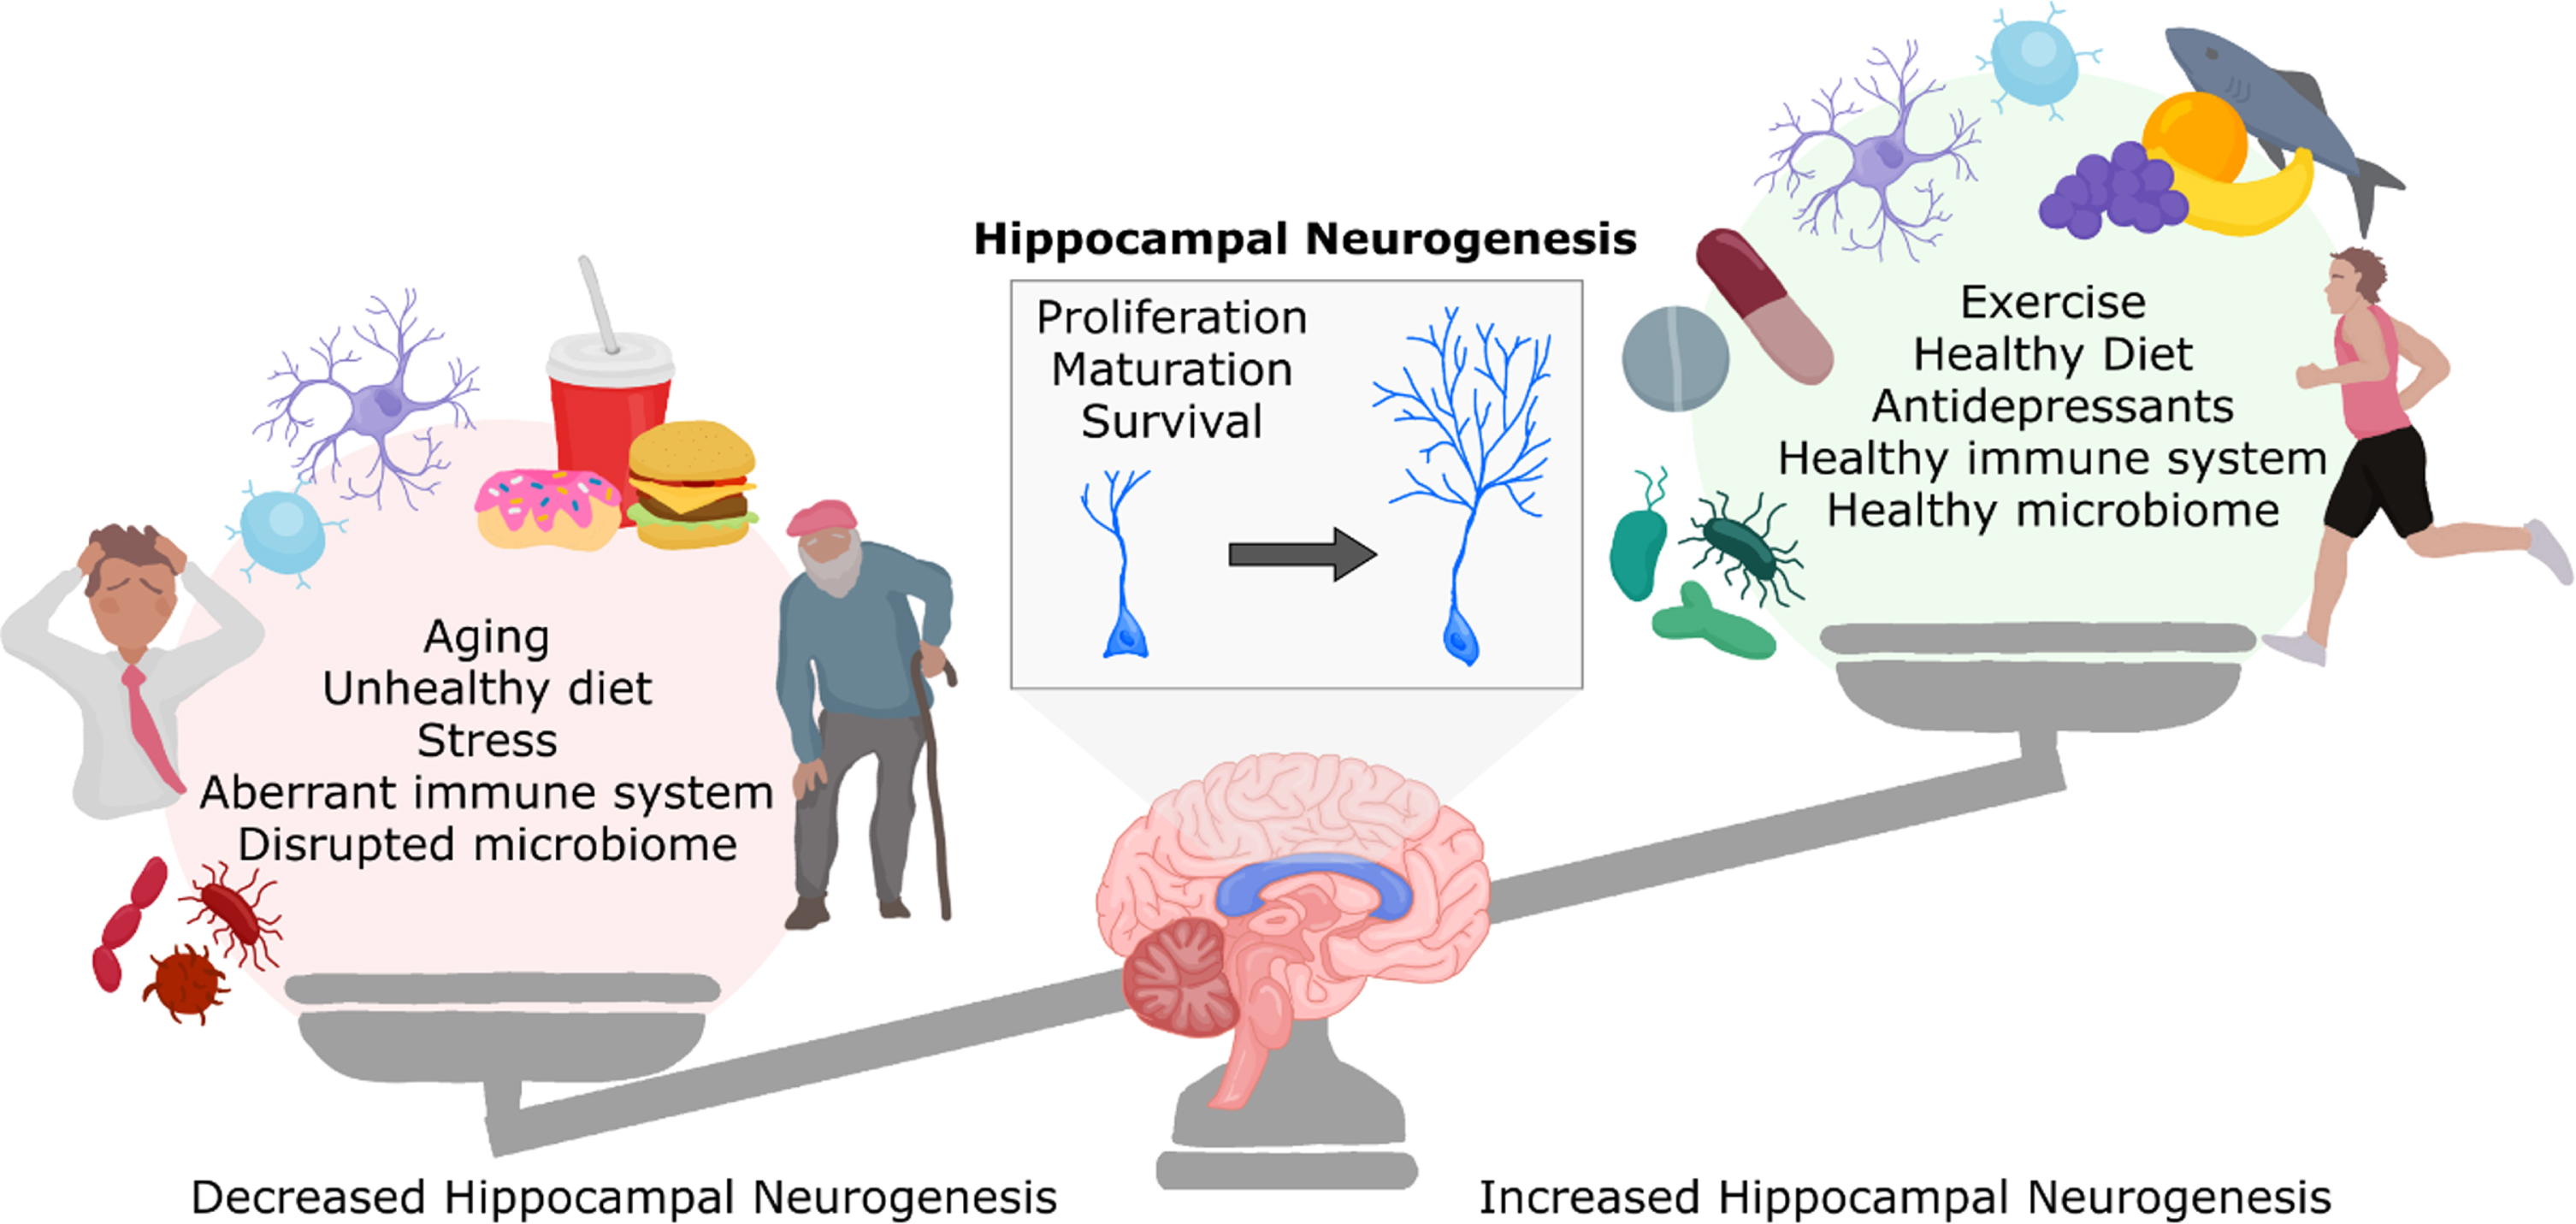 Factors influencing adult hippocampal neurogenesis. Adult hippocampal neurogenesis is increased following exercise, antidepressant drug consumption, a healthy diet, neurogenic immune signalling, and a healthy gut microbiome. However, other factors can be detrimental to adult hippocampal neurogenesis, including aging, diets high in fat and sugar, stress, an aberrant immune system, and disruption of the gut microbiome. These factors can influence the proliferation, maturation and survival of neurons in the adult hippocampus. Figure adapted from [41].